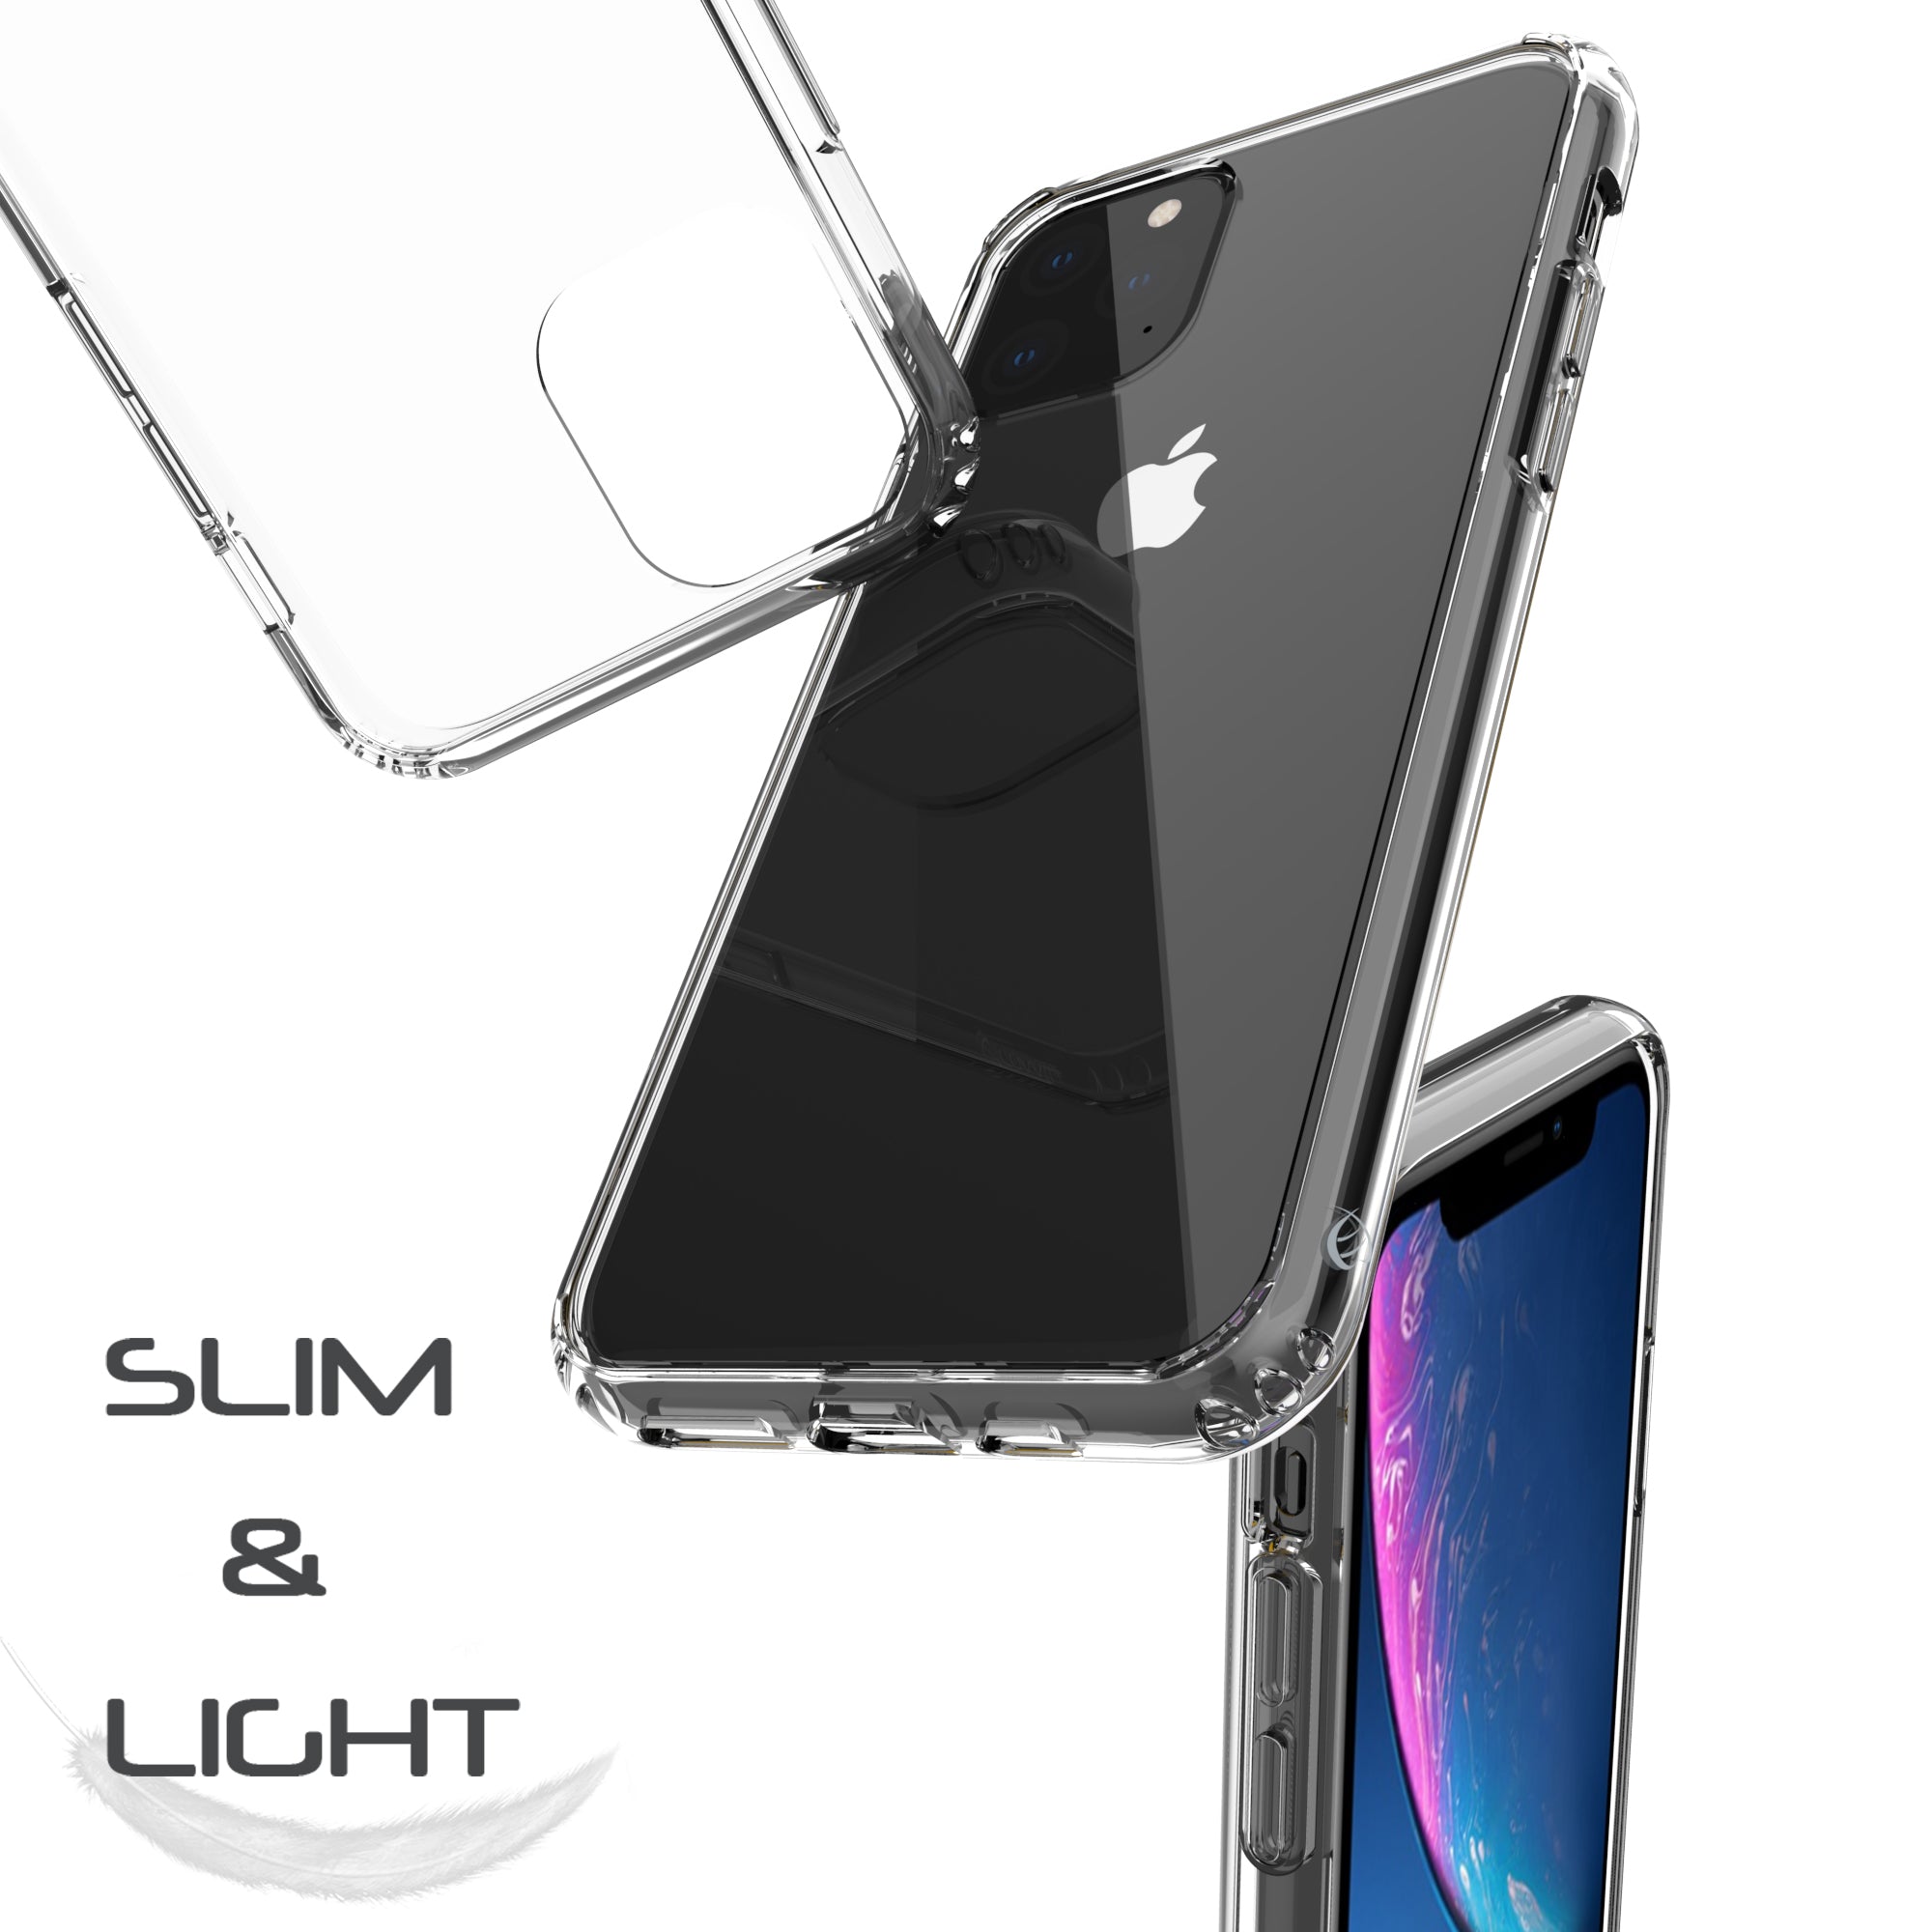 Luvvitt $250 Warranty CLEAR VIEW Case + Liquid Glass Screen Protector Bundle for iPhone 11 Pro Max 2019